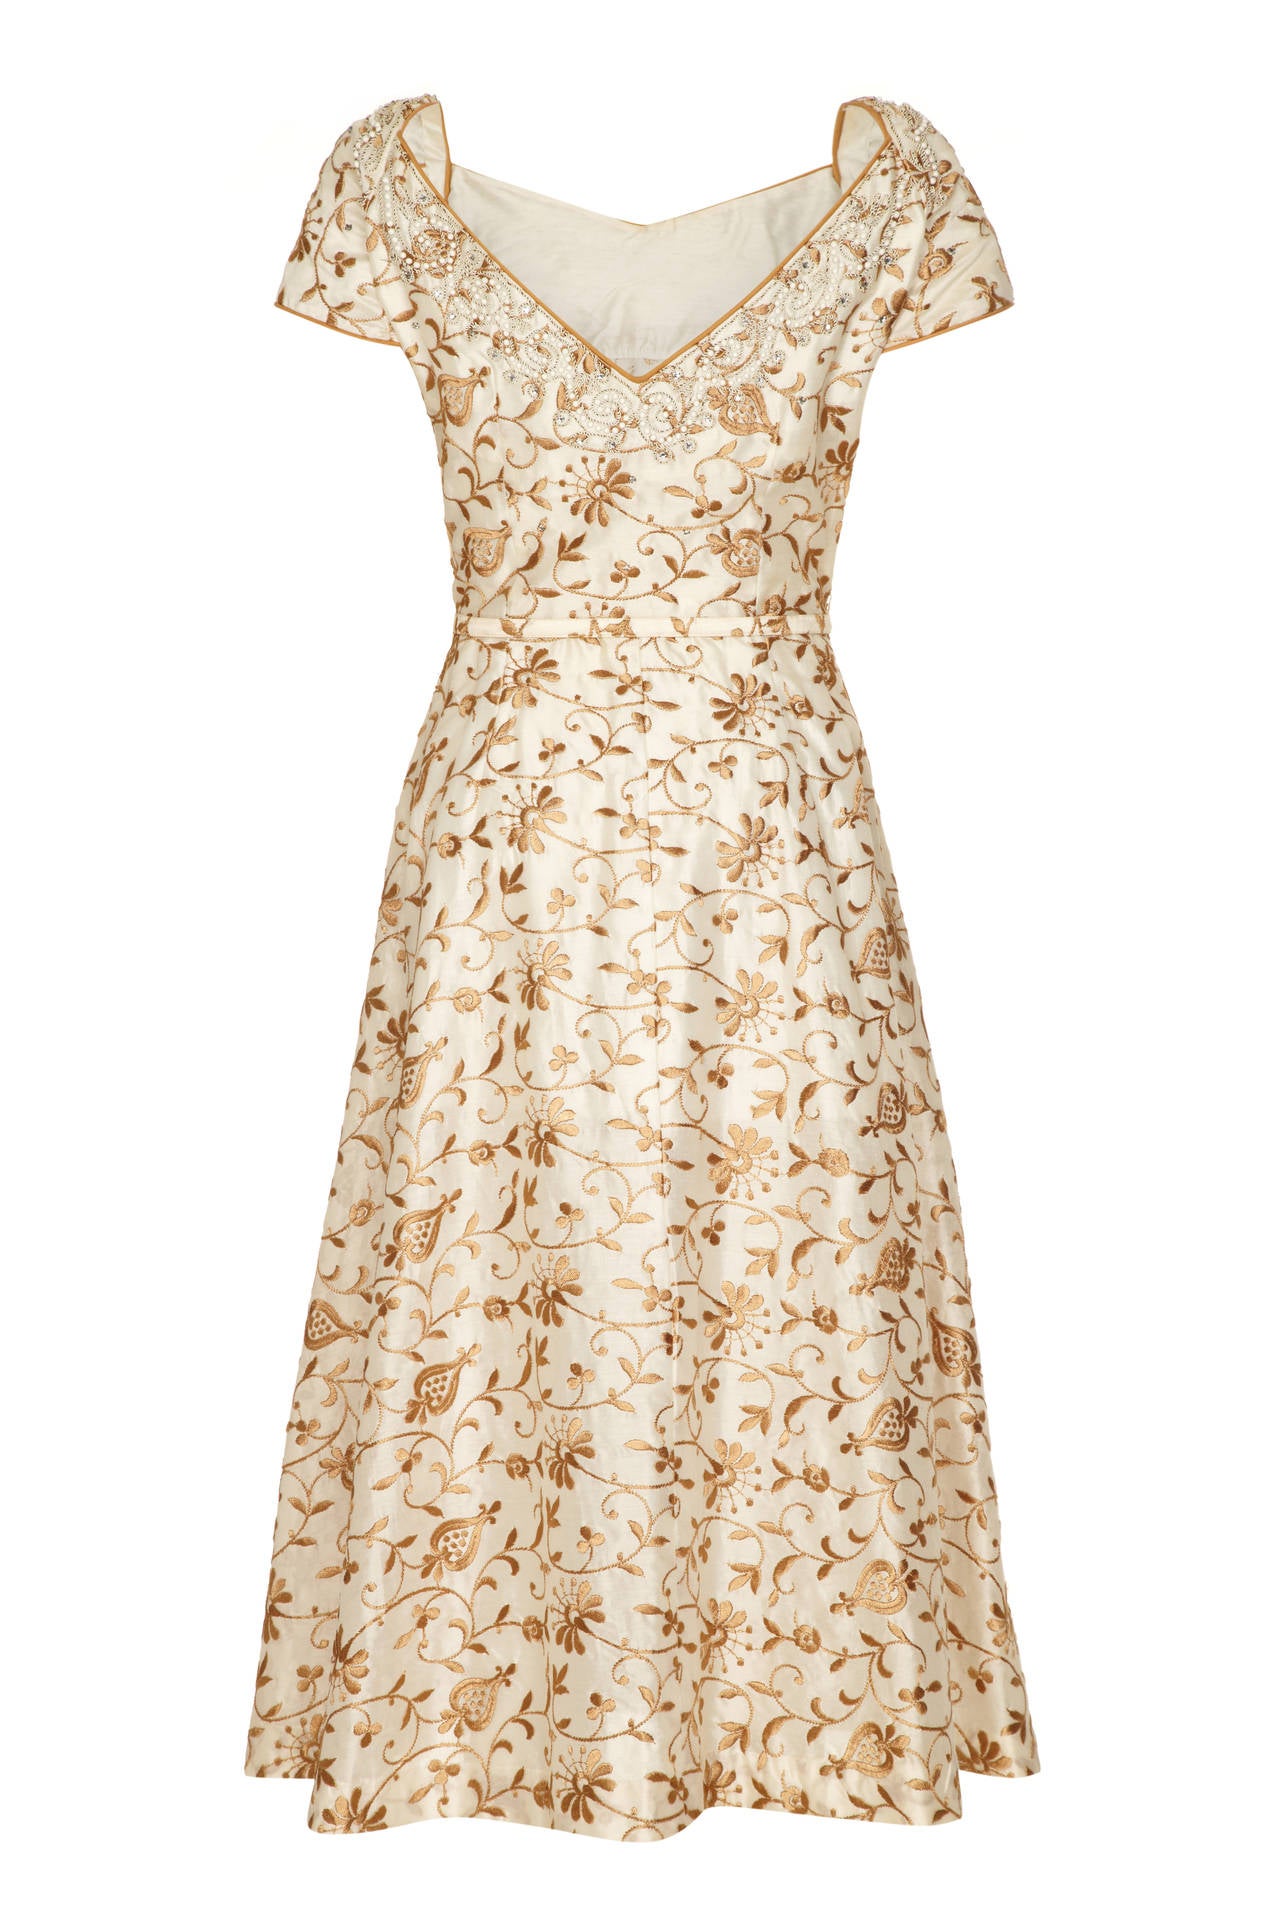 Absolutely beautiful cream and gold floral brocade silk dress by Kramer with exquisite beading, embroidery and rhinestone detail around the neckline.  The dress features pretty cap sleeves, sweetheart neckline with deep V to the back and original